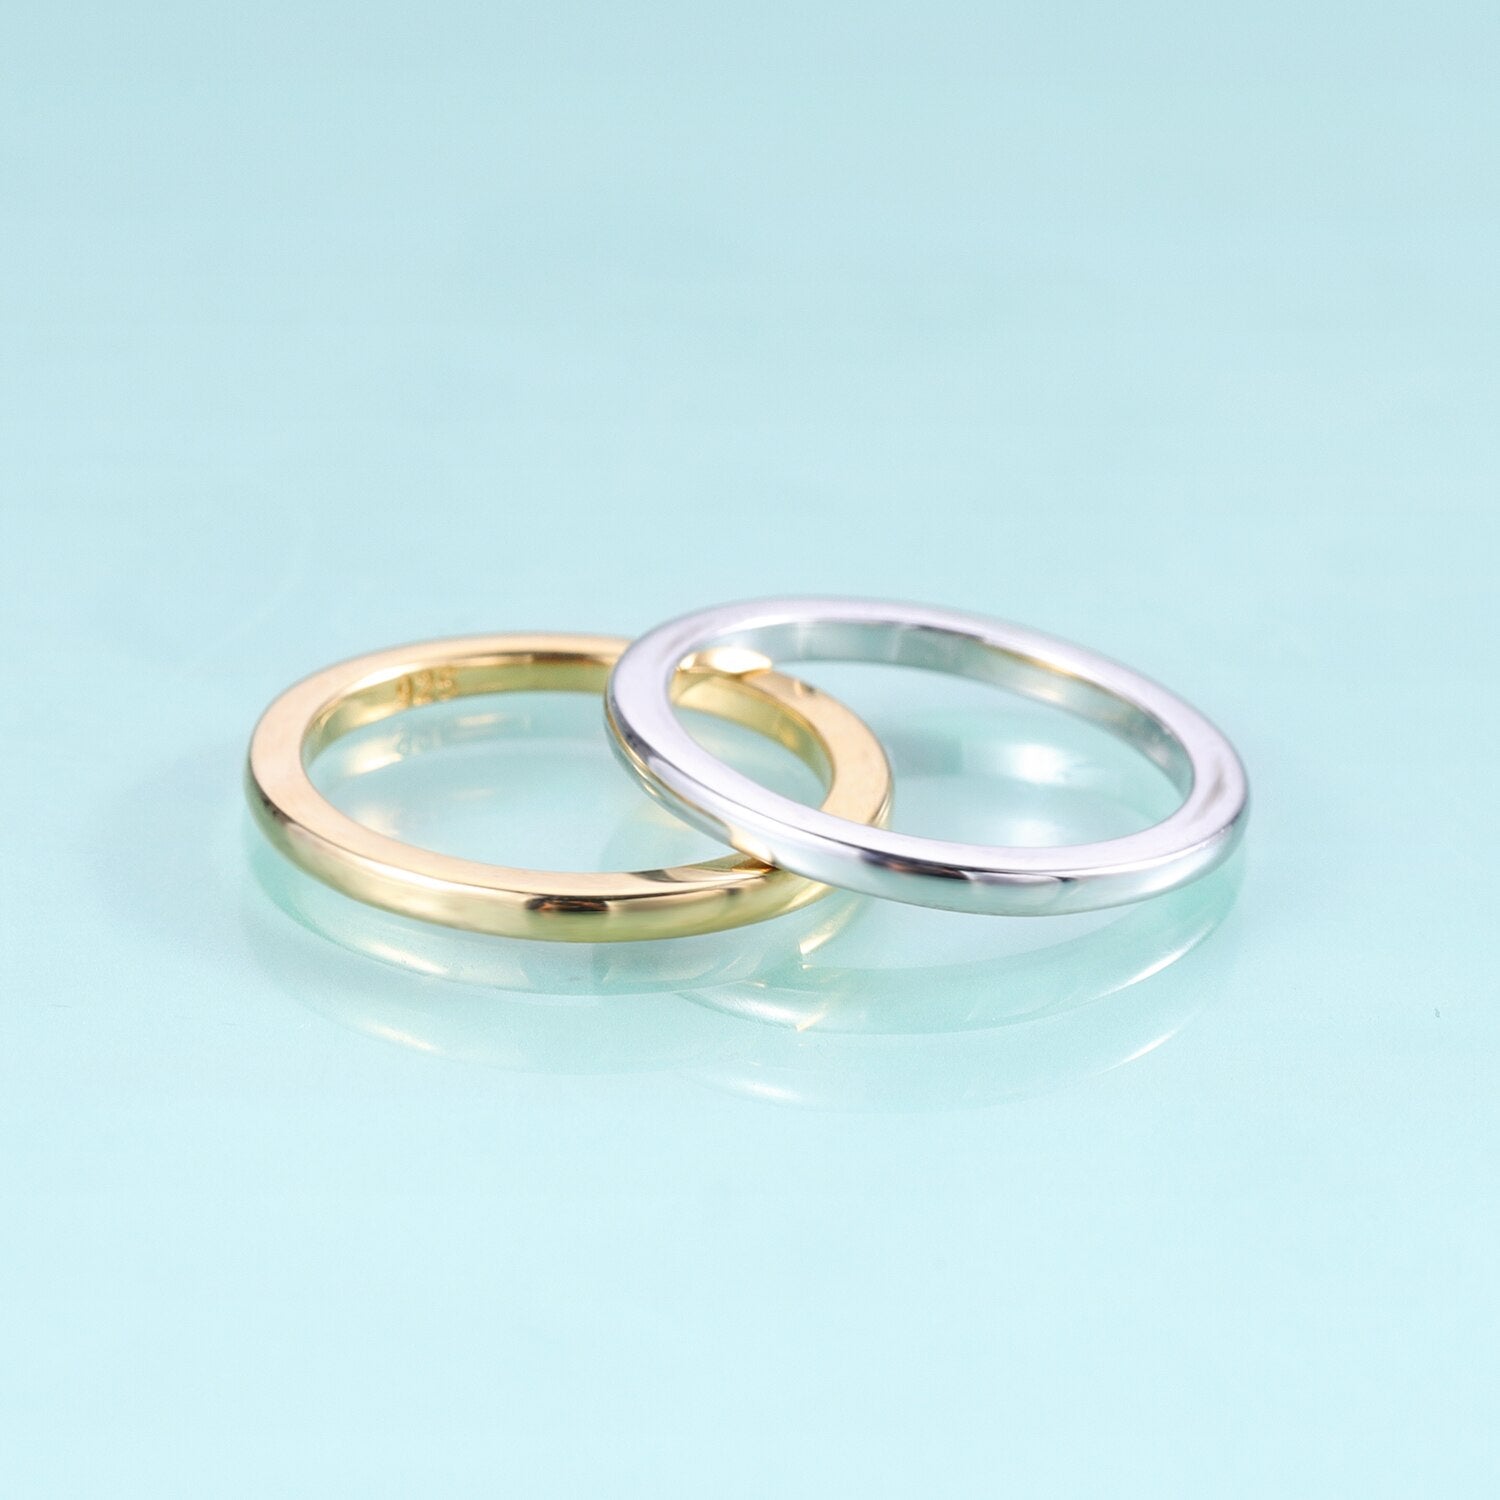 Plain gold wedding band simple and classic Rosery Poetry